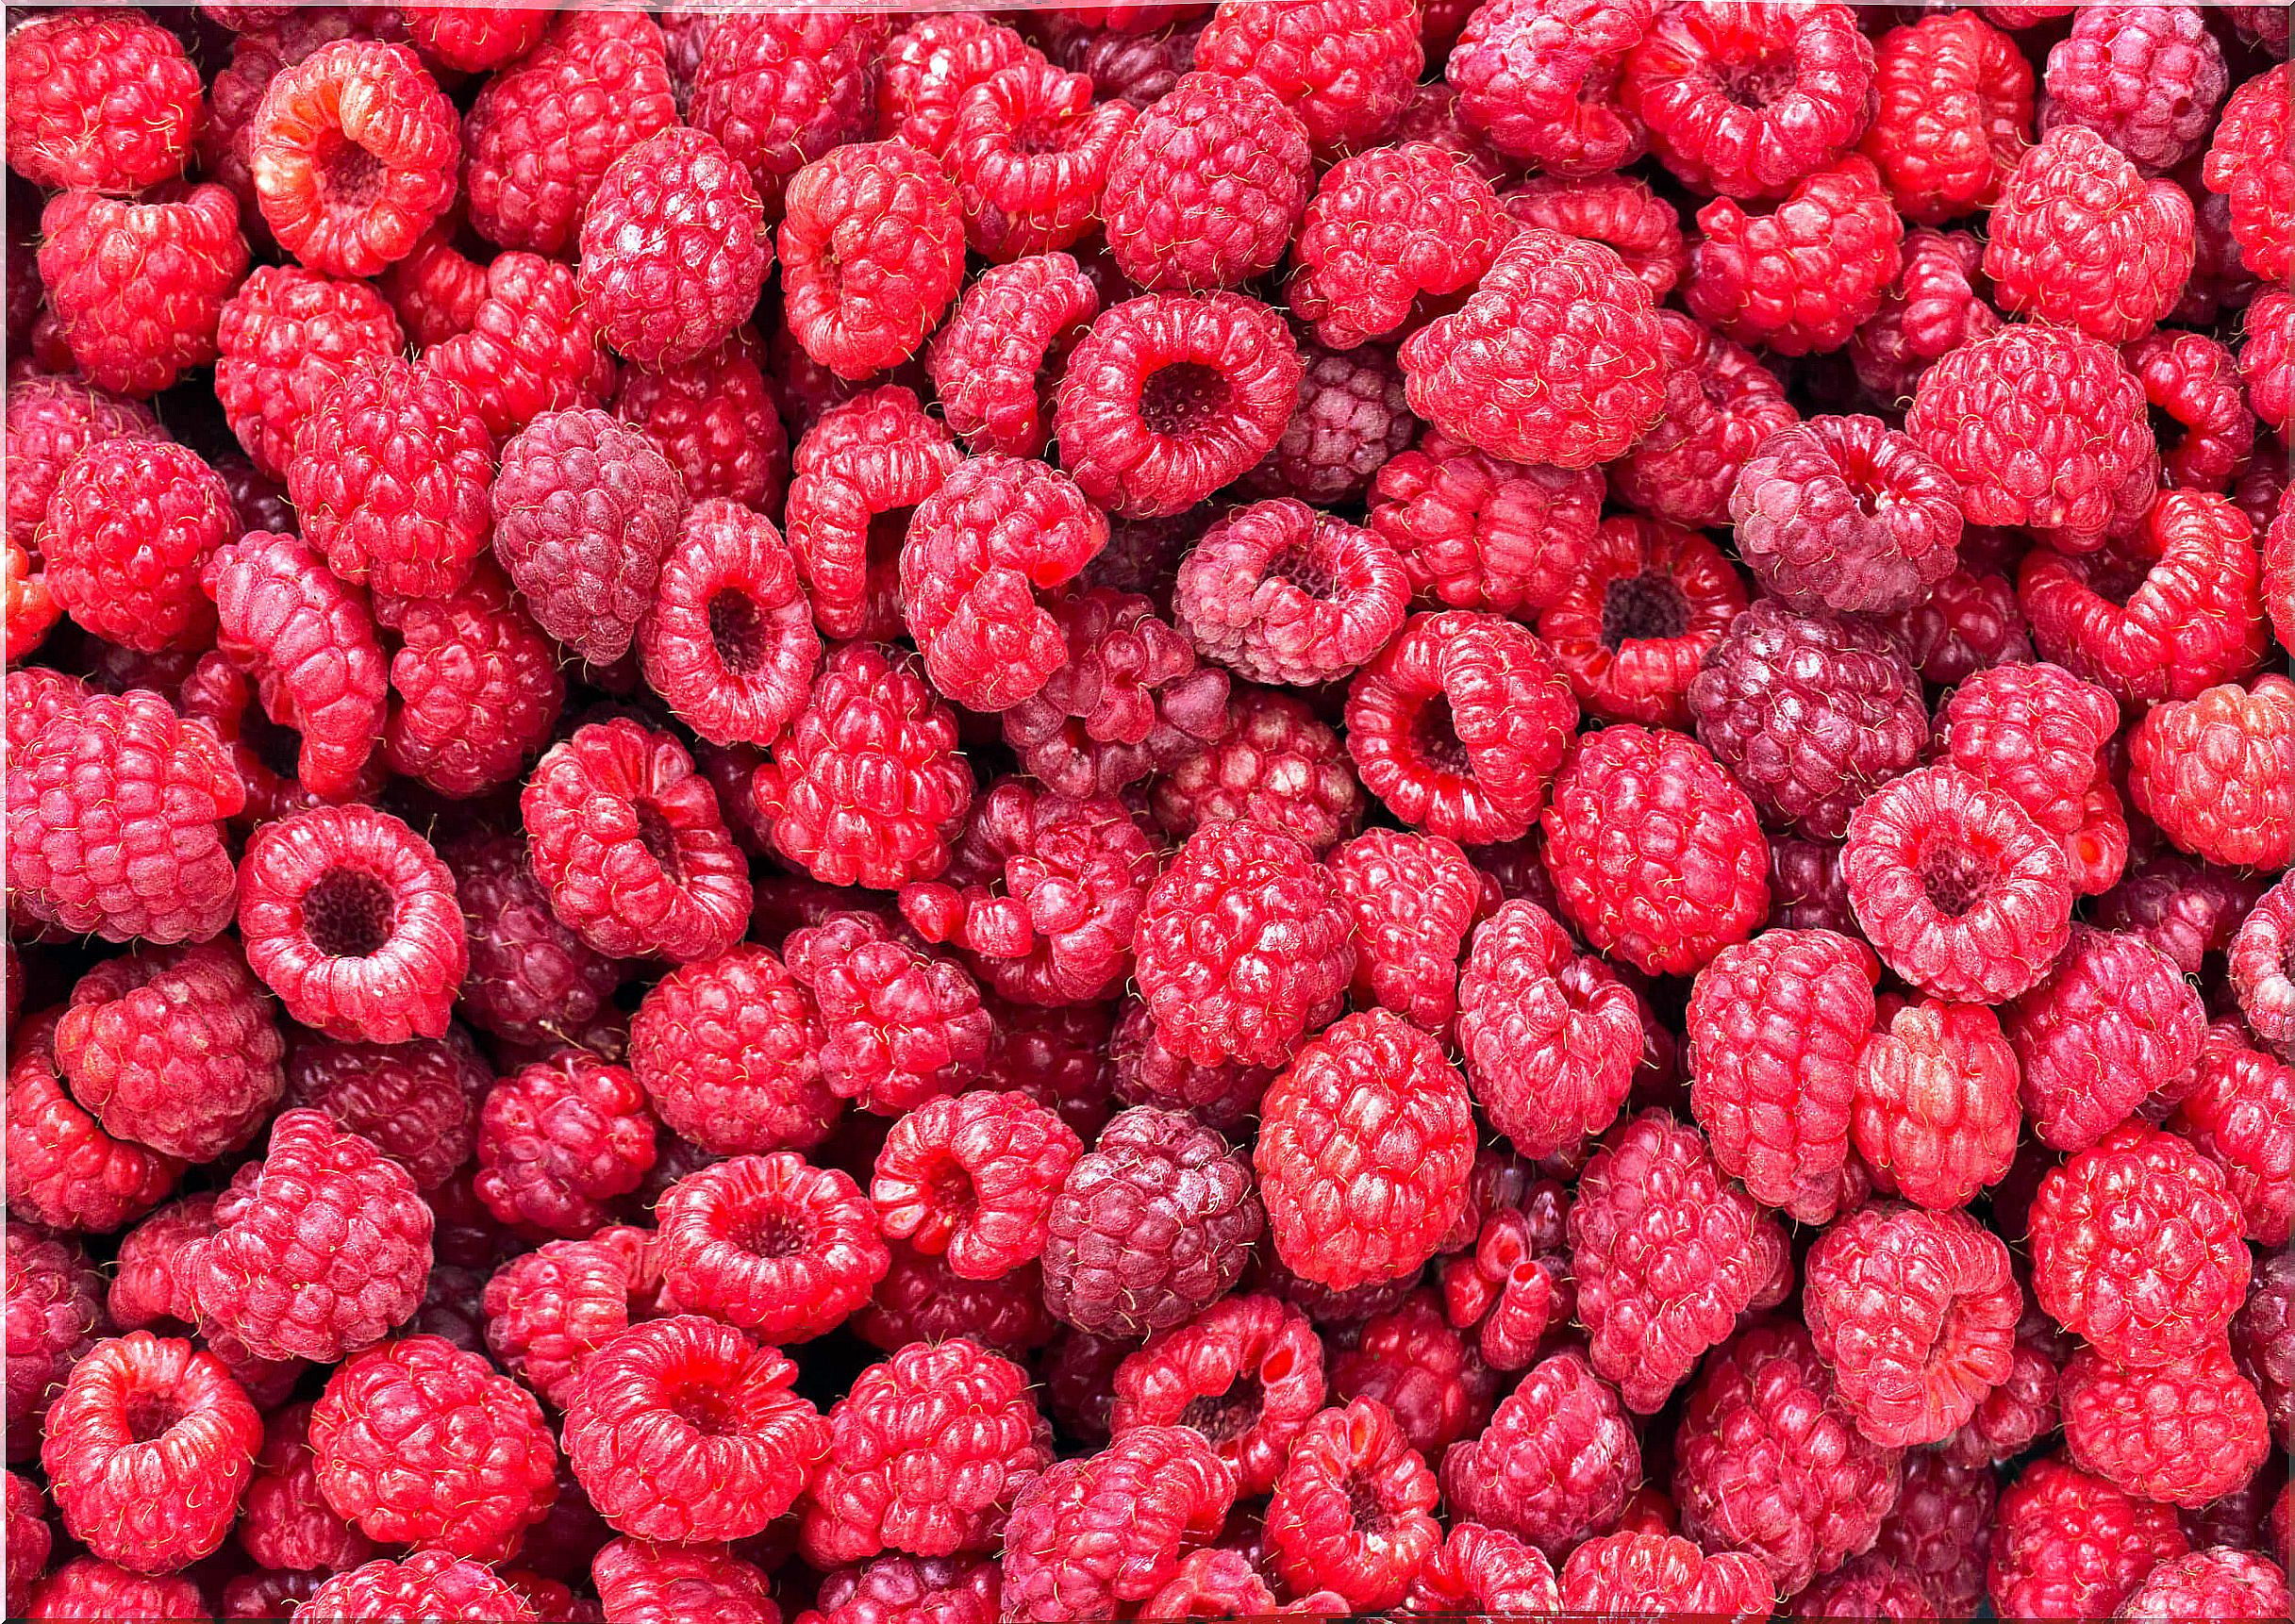 Raspberries: discover how to use them in your diet